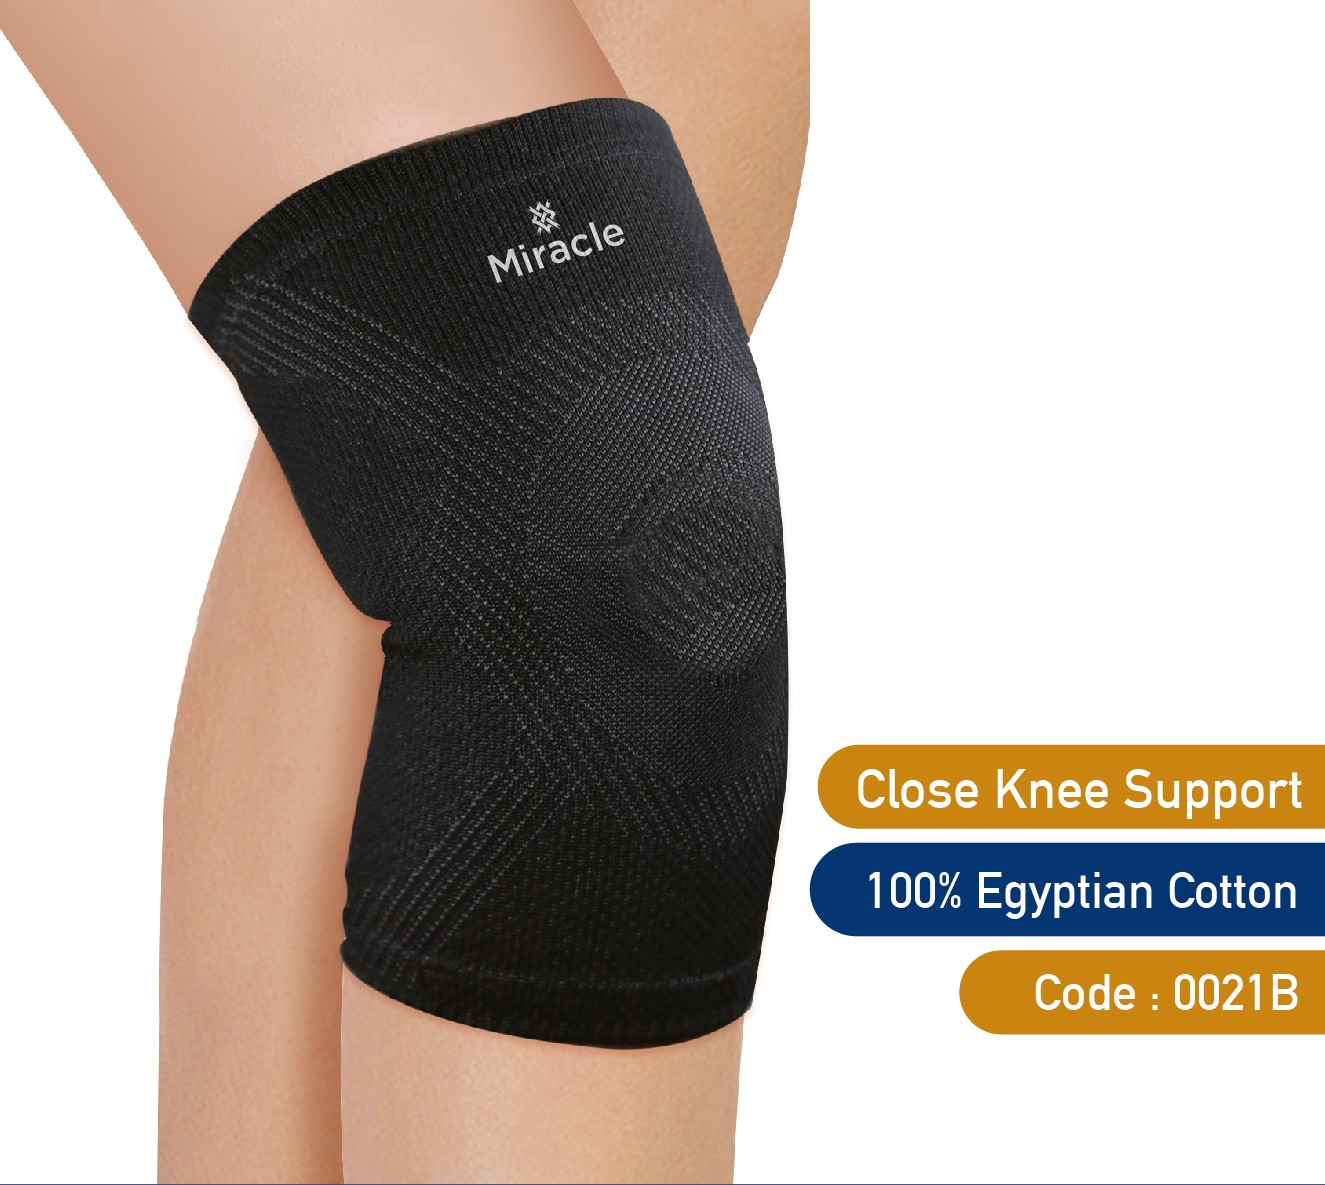 Close Knee Support 